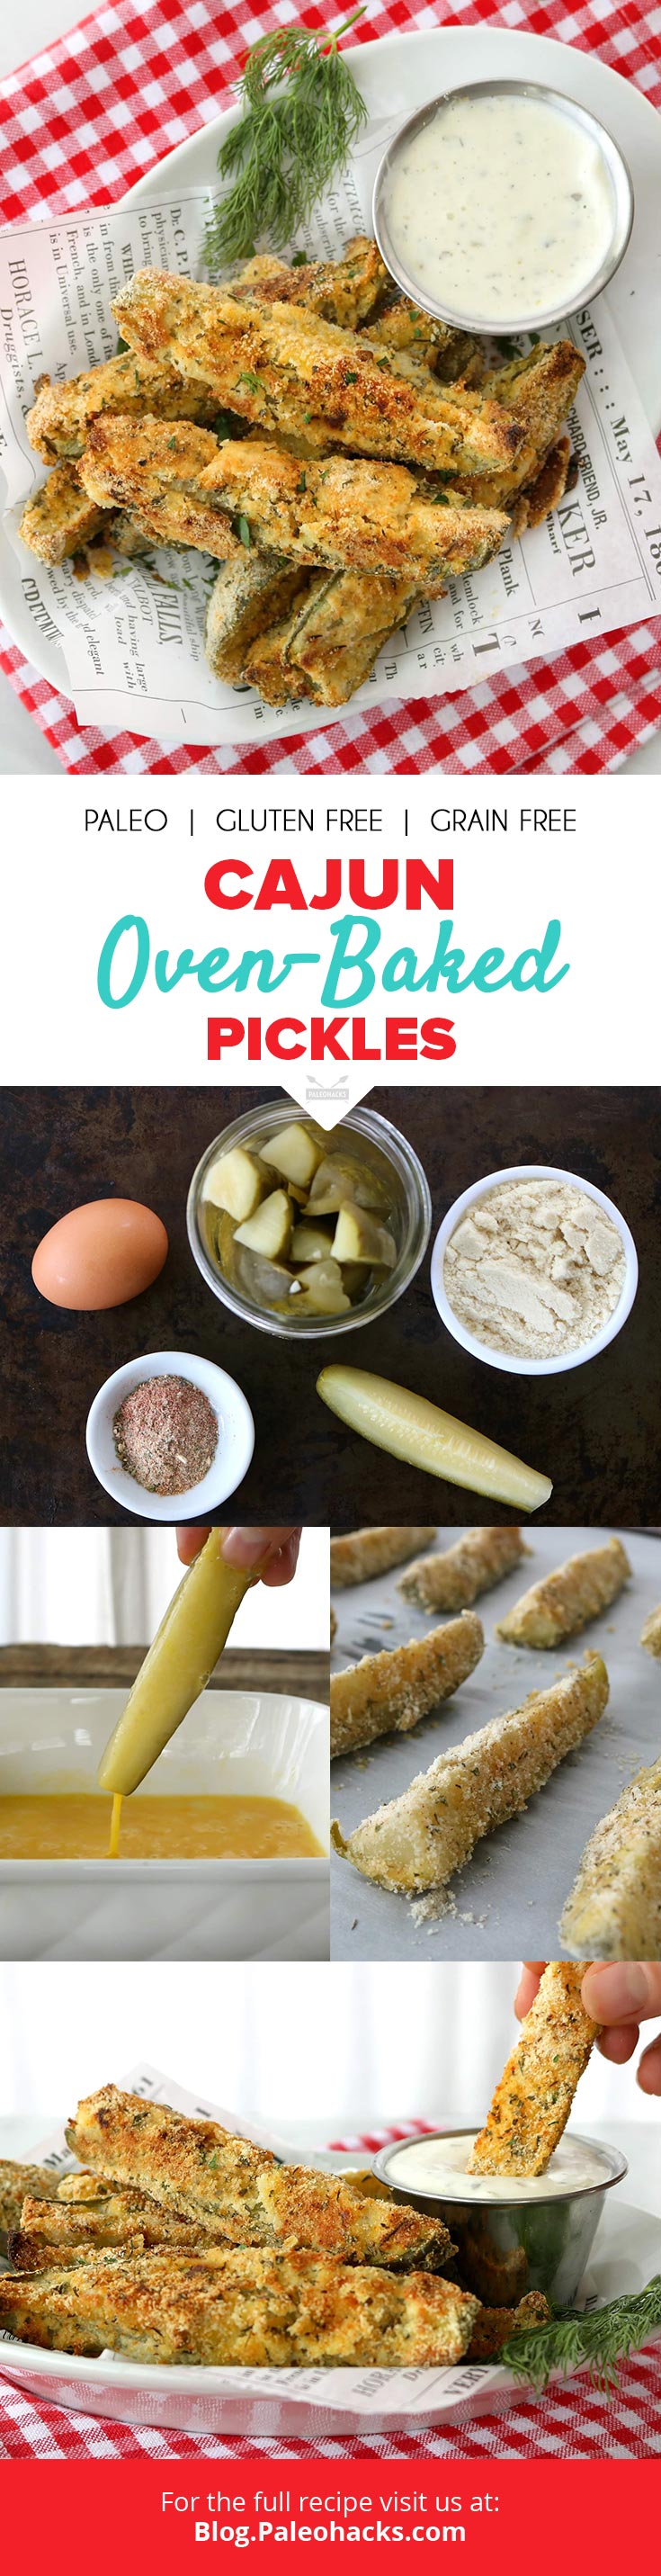 How to make baked pickles